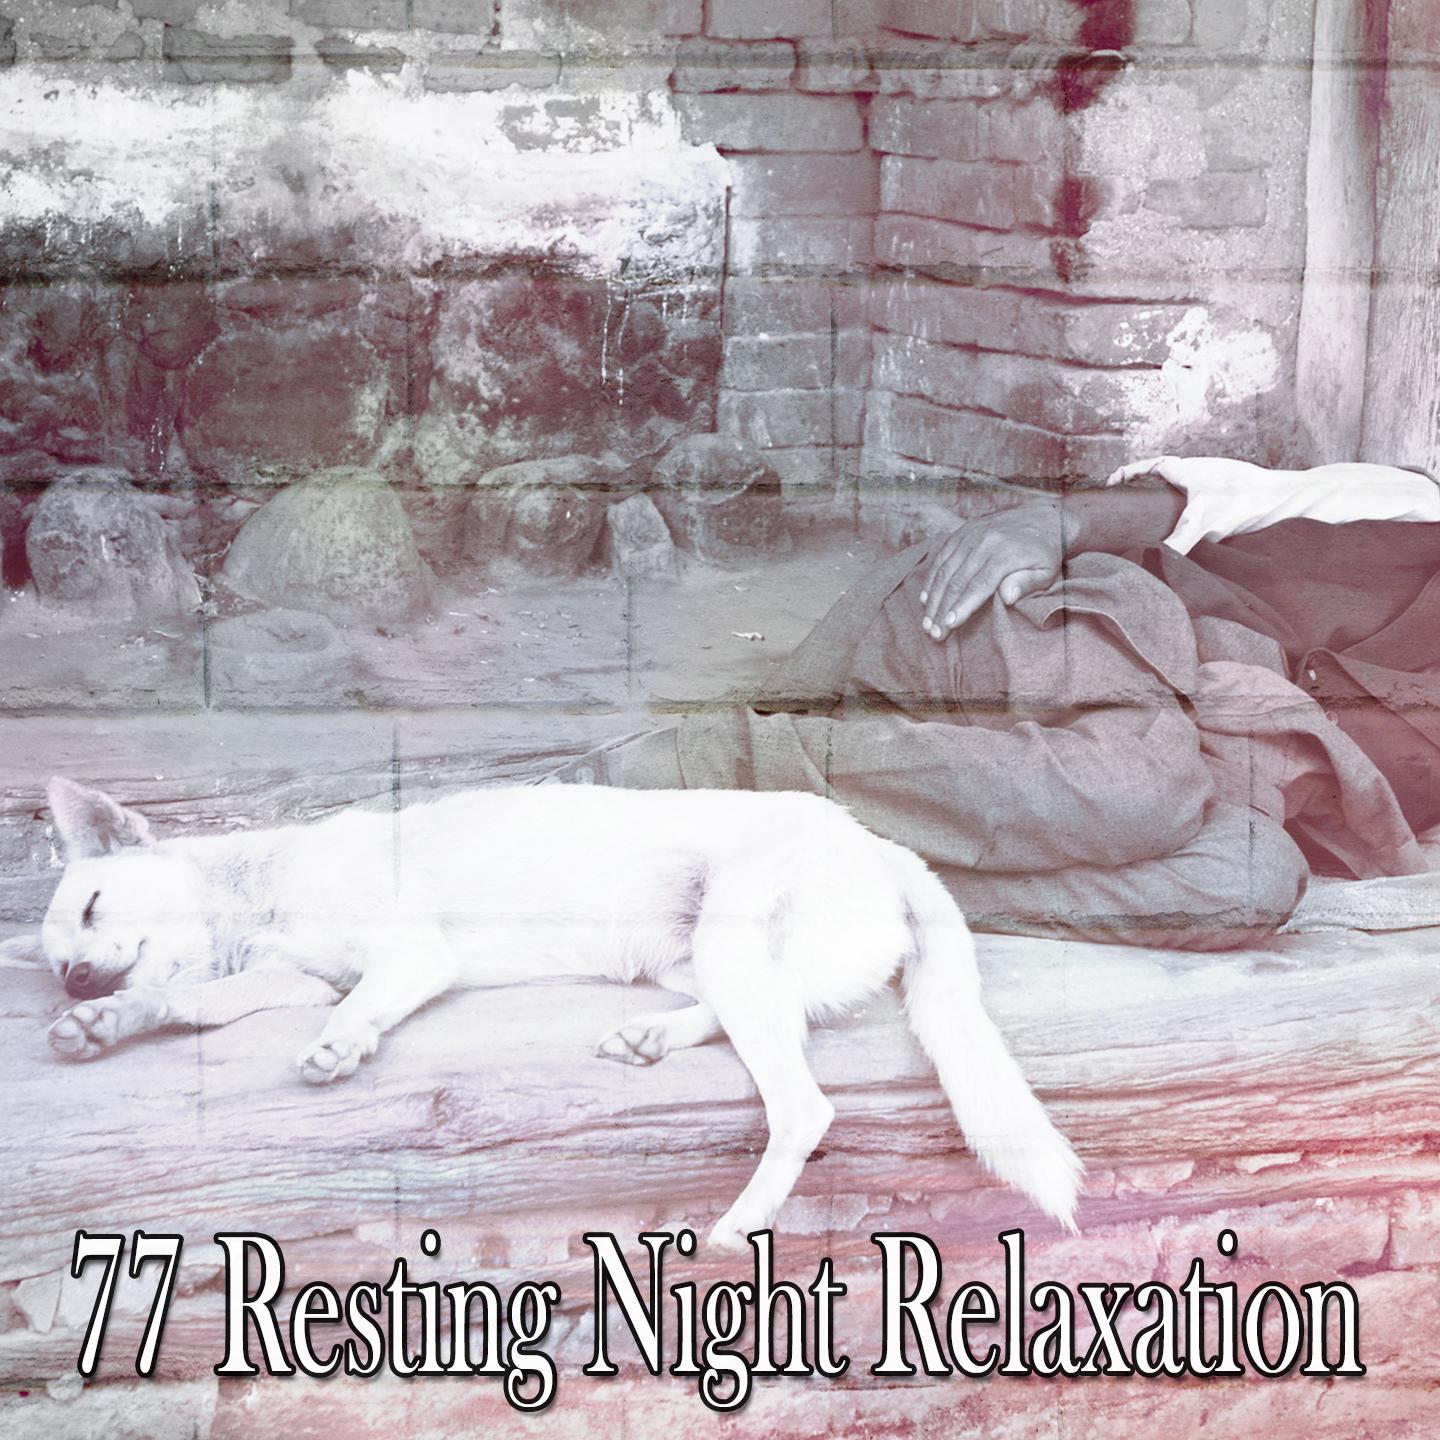 77 Resting Night Relaxation